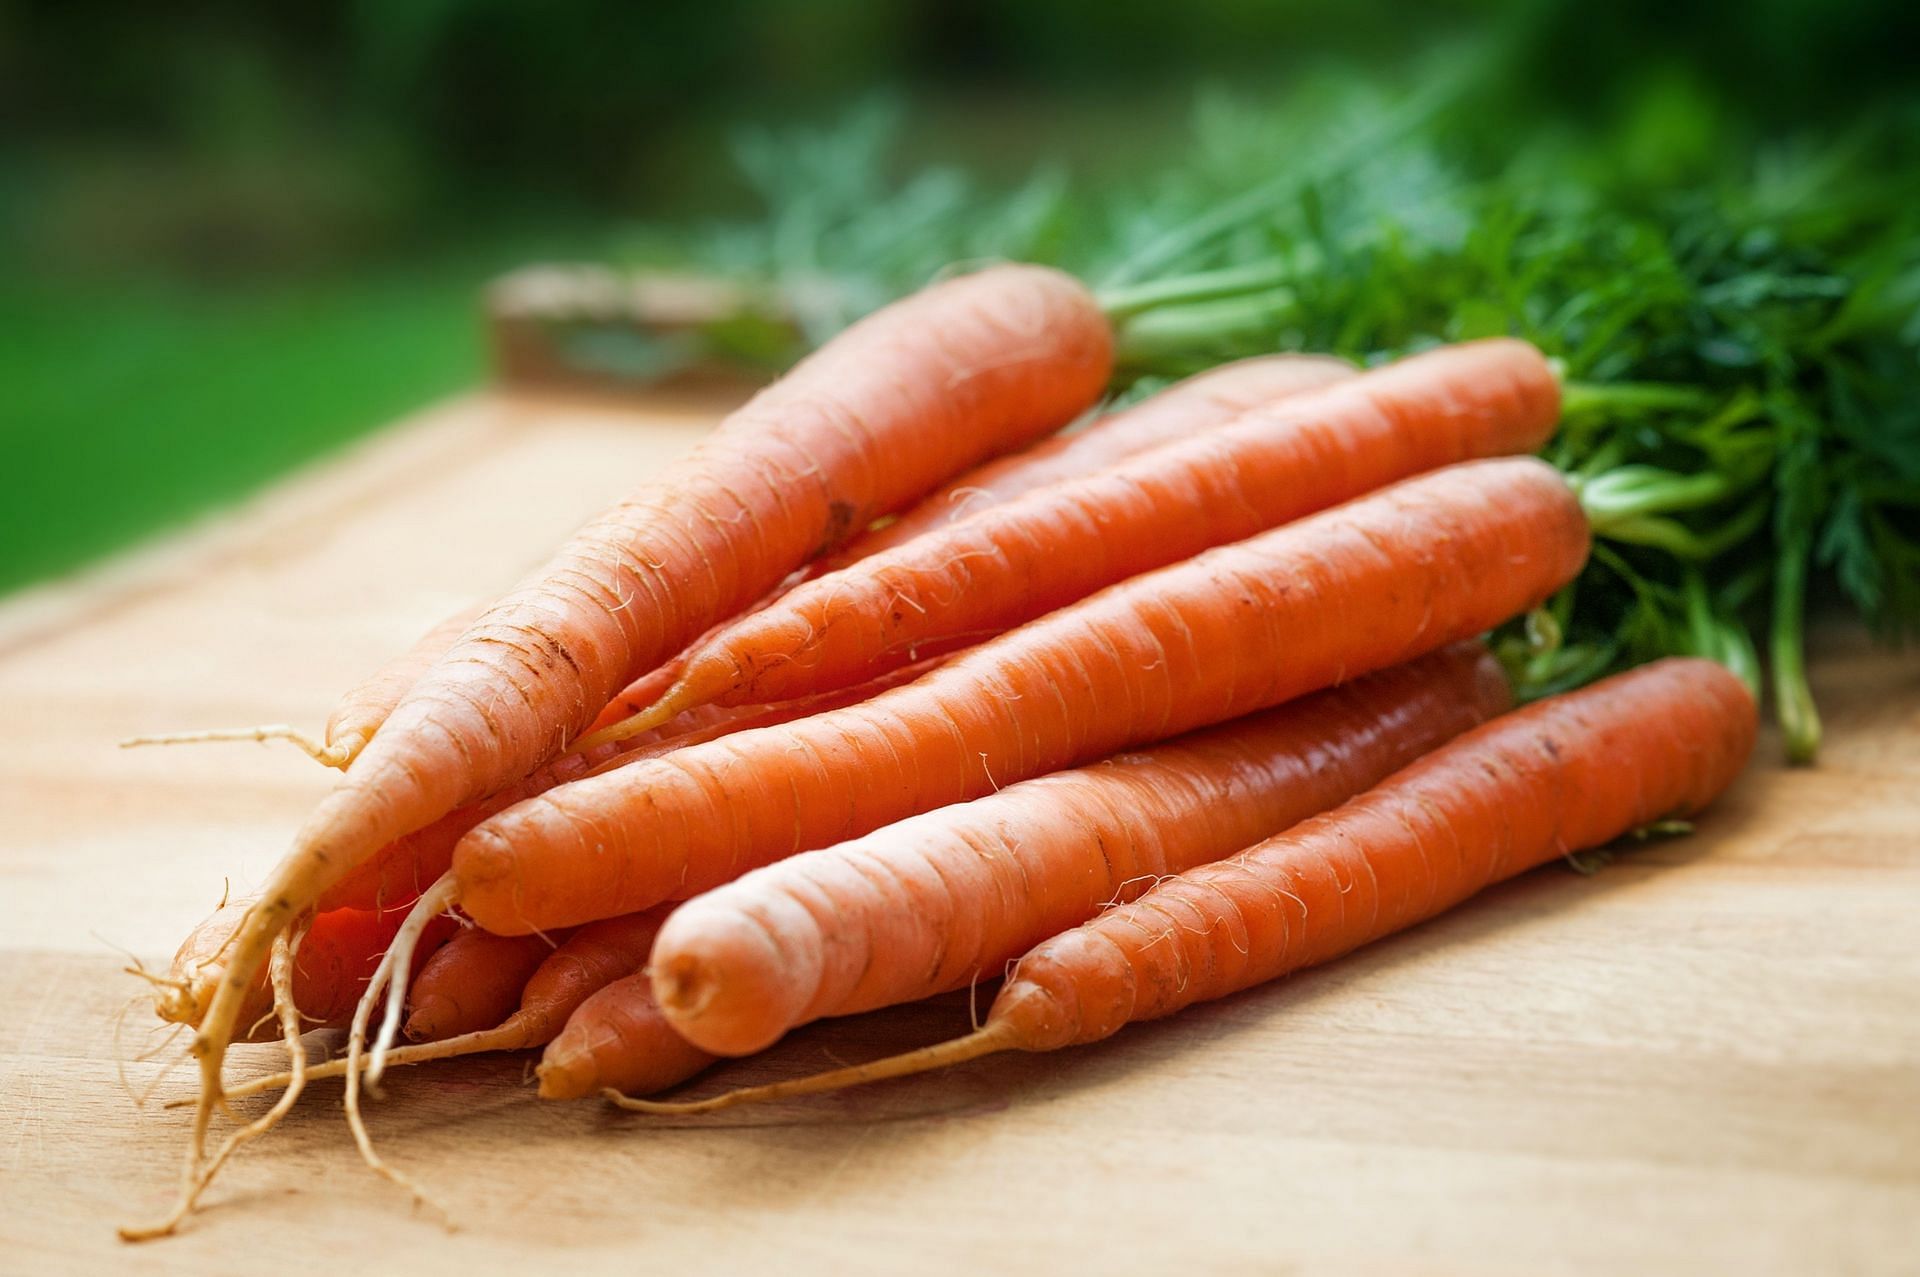 Carrot Juice: A Refreshing and Nutritious Beverage (Image via Pexels)